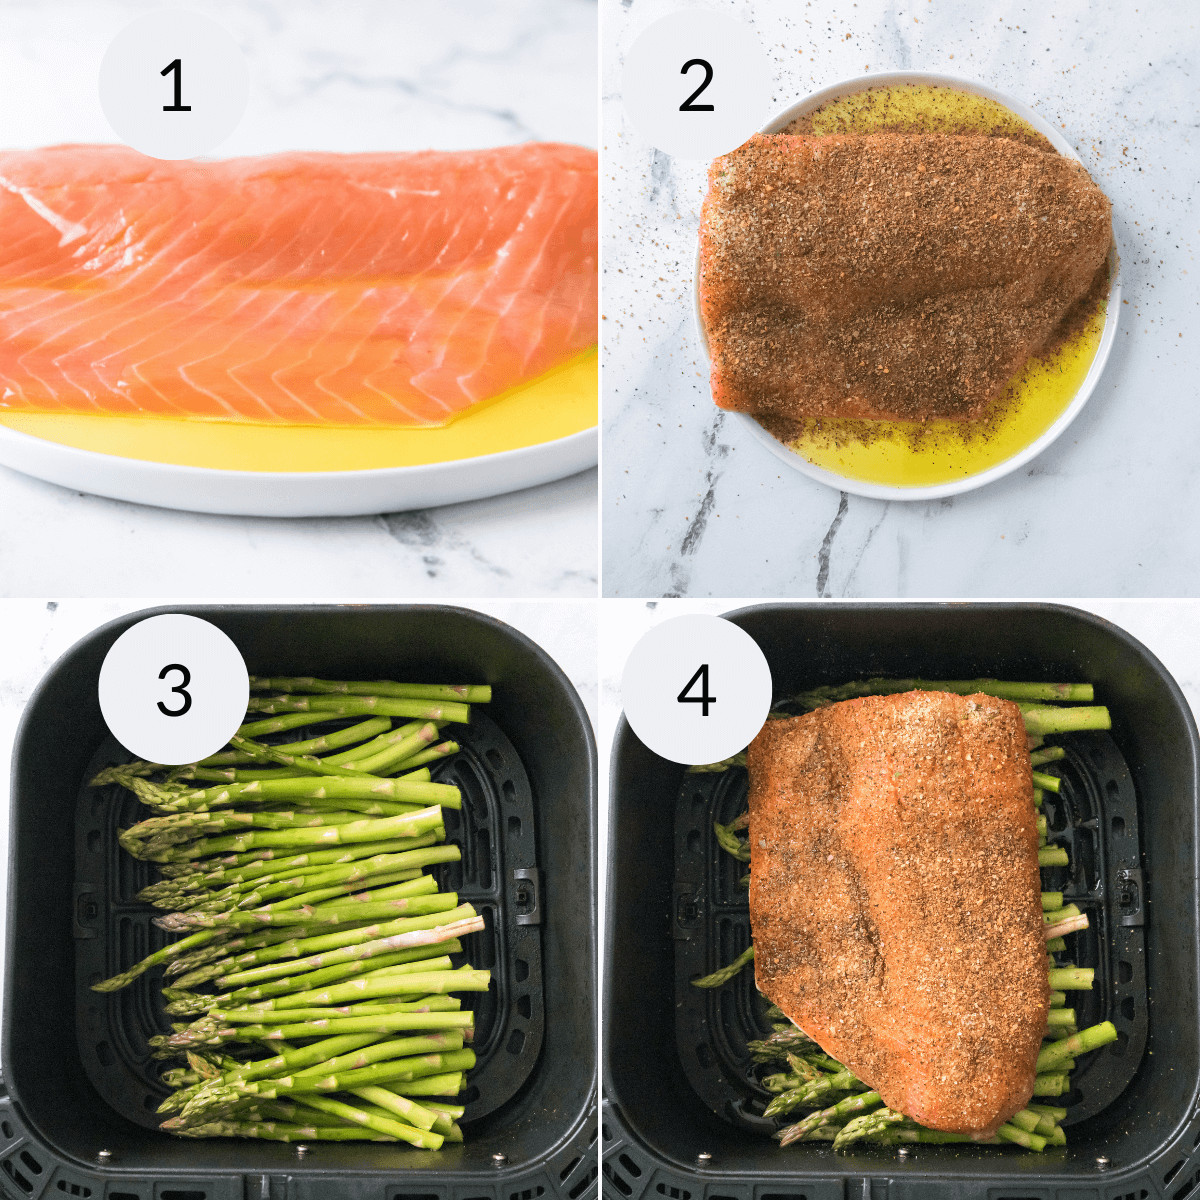 Preparing the salmon and then seasoning. Add the asparagus and place the salmon on top.